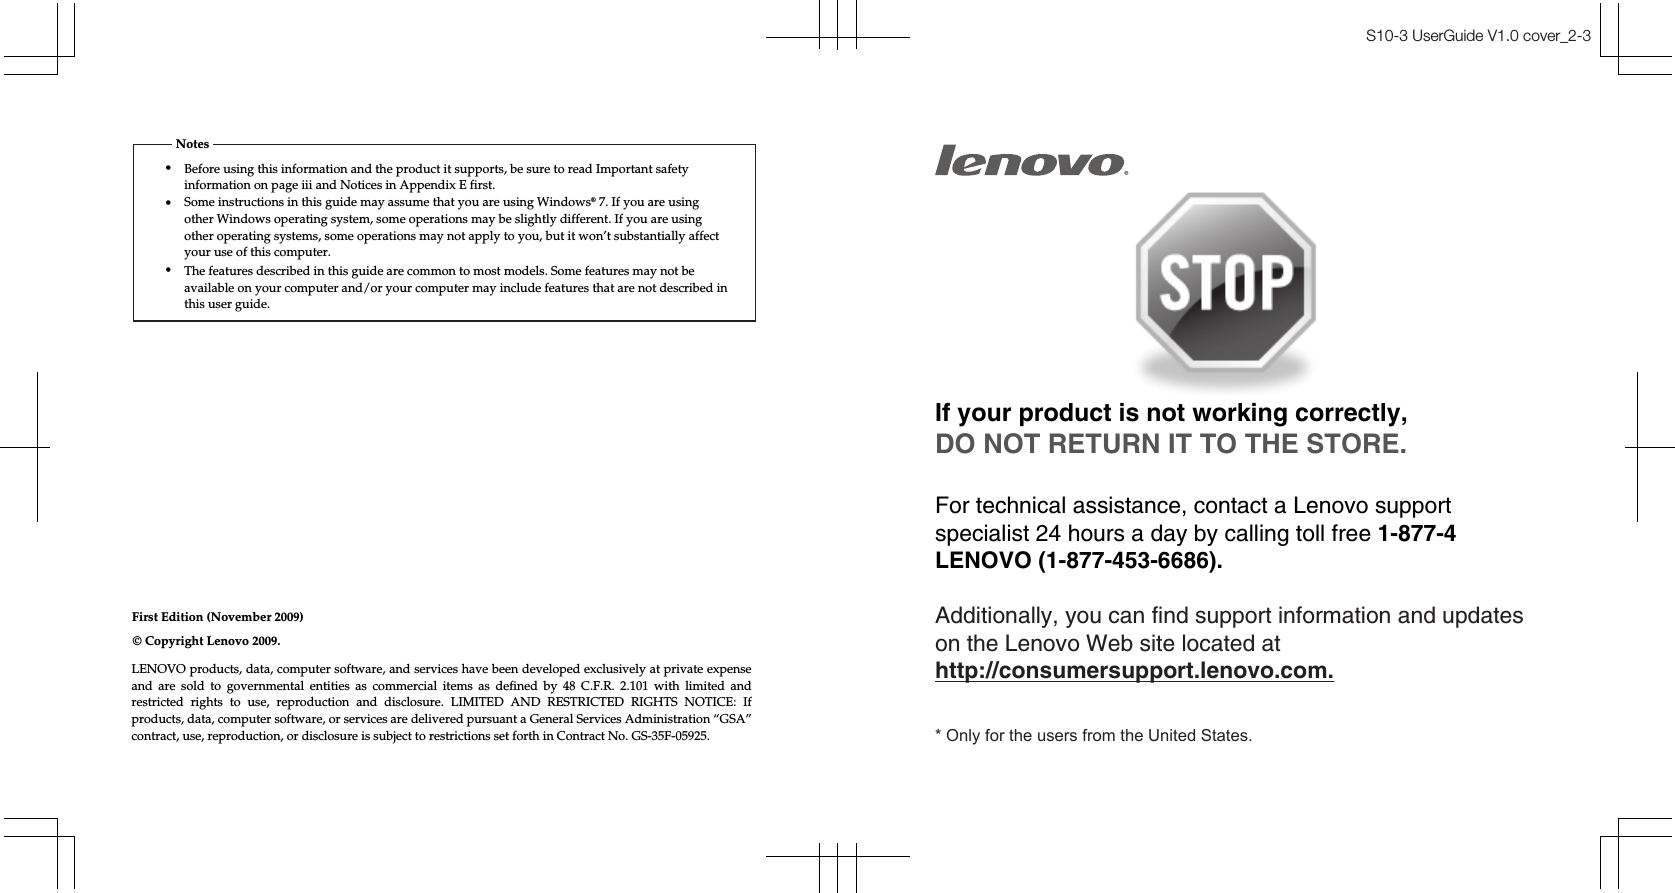 First Edition (November 2009)•Notes© Copyright Lenovo 2009. S10-3 UserGuide V1.0 cover_2-3If your product is not working correctly, DO NOT RETURN IT TO THE STORE.For technical assistance, contact a Lenovo support specialist 24 hours a day by calling toll free 1-877-4 LENOVO (1-877-453-6686).   Additionally, you can find support information and updates on the Lenovo Web site located at http://consumersupport.lenovo.com.* Only for the users from the United States.Before using this information and the product it supports, be sure to read Important safety information on page iii and Notices in Appendix E first.•Some instructions in this guide may assume that you are using Windows® 7. If you are using other Windows operating system, some operations may be slightly different. If you are using other operating systems, some operations may not apply to you, but it won’t substantially affect your use of this computer.•The features described in this guide are common to most models. Some features may not be available on your computer and/or your computer may include features that are not described in this user guide.LENOVO products, data, computer software, and services have been developed exclusively at private expense and  are  sold  to  governmental  entities  as  commercial  items  as  defined  by  48  C.F.R.  2.101  with  limited  and restricted  rights  to  use,  reproduction  and  disclosure.  LIMITED  AND  RESTRICTED  RIGHTS  NOTICE:  If products, data, computer software, or services are delivered pursuant a General Services Administration “GSA” contract, use, reproduction, or disclosure is subject to restrictions set forth in Contract No. GS-35F-05925.